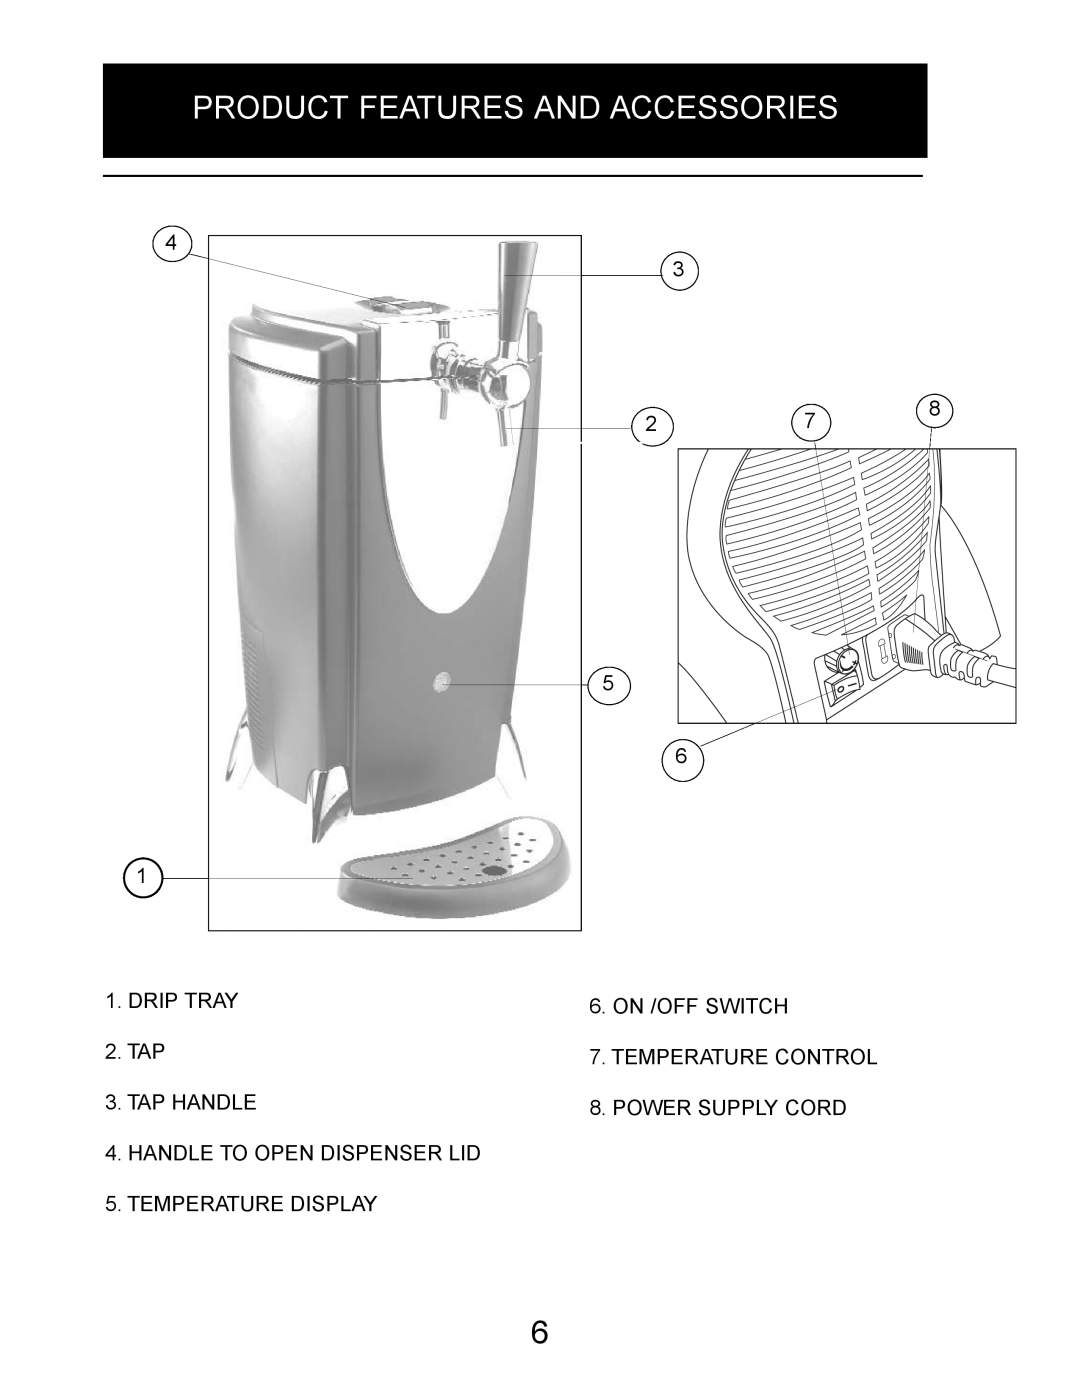 Danby DBD5L owner manual Product Features And Accessories, DRIP TRAY 2. TAP 3. TAP HANDLE 4. HANDLE TO OPEN DISPENSER LID 